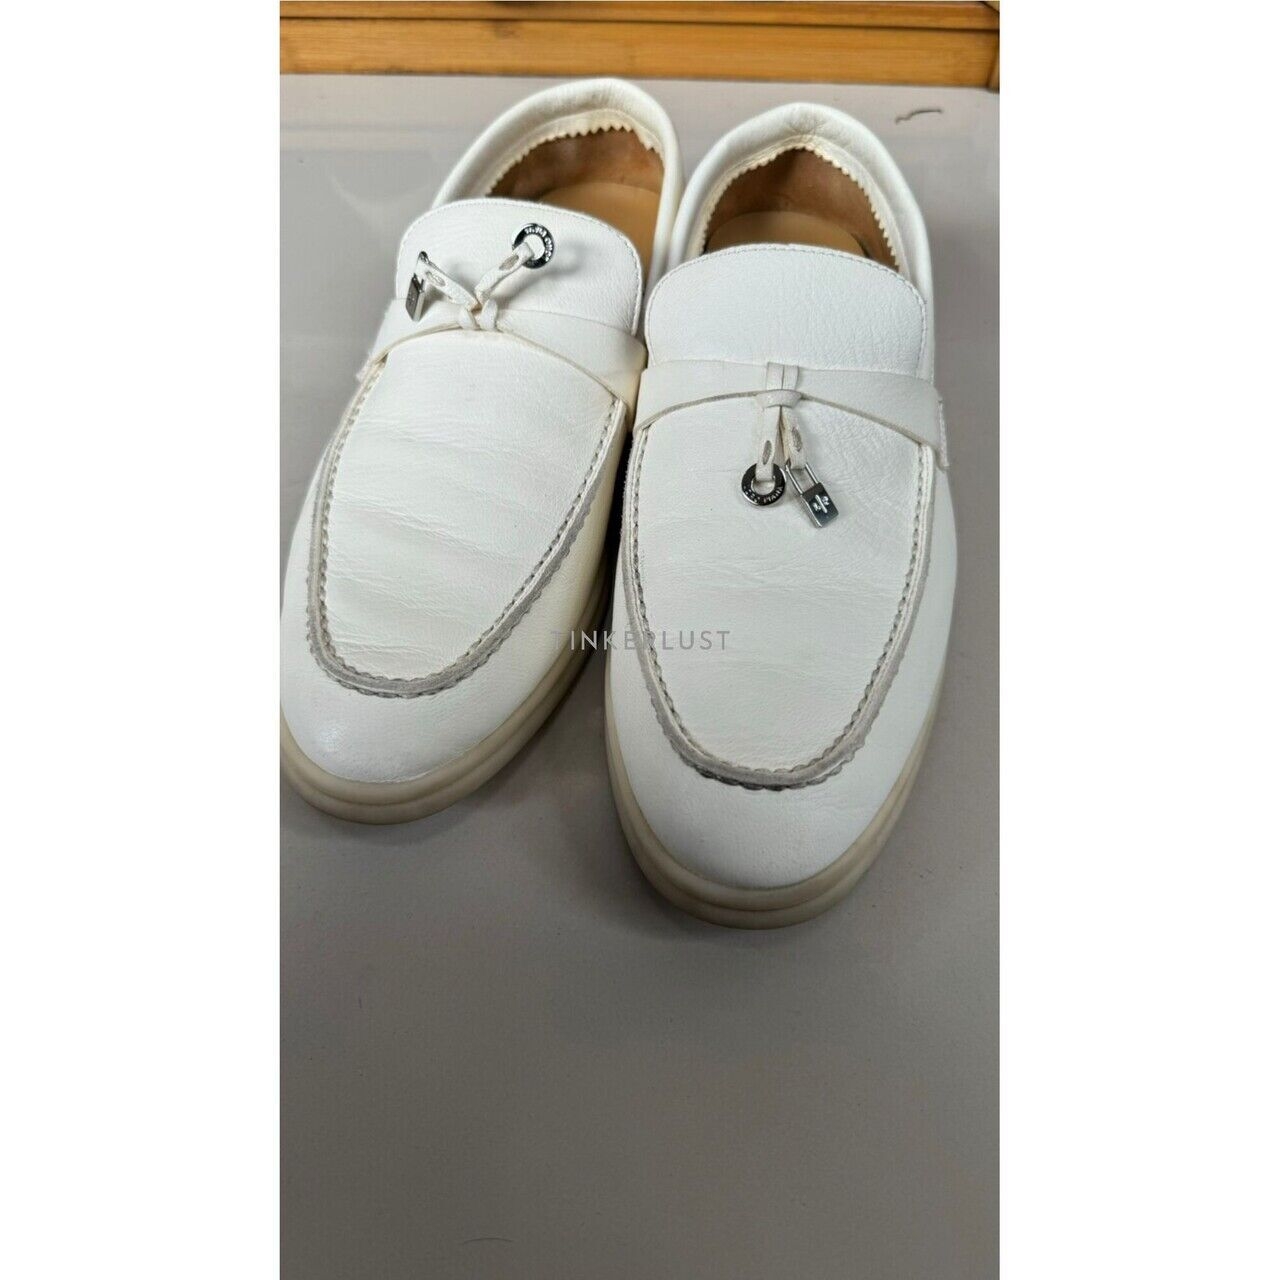 Loro Piana Summer Charms Walk Leather Loafers